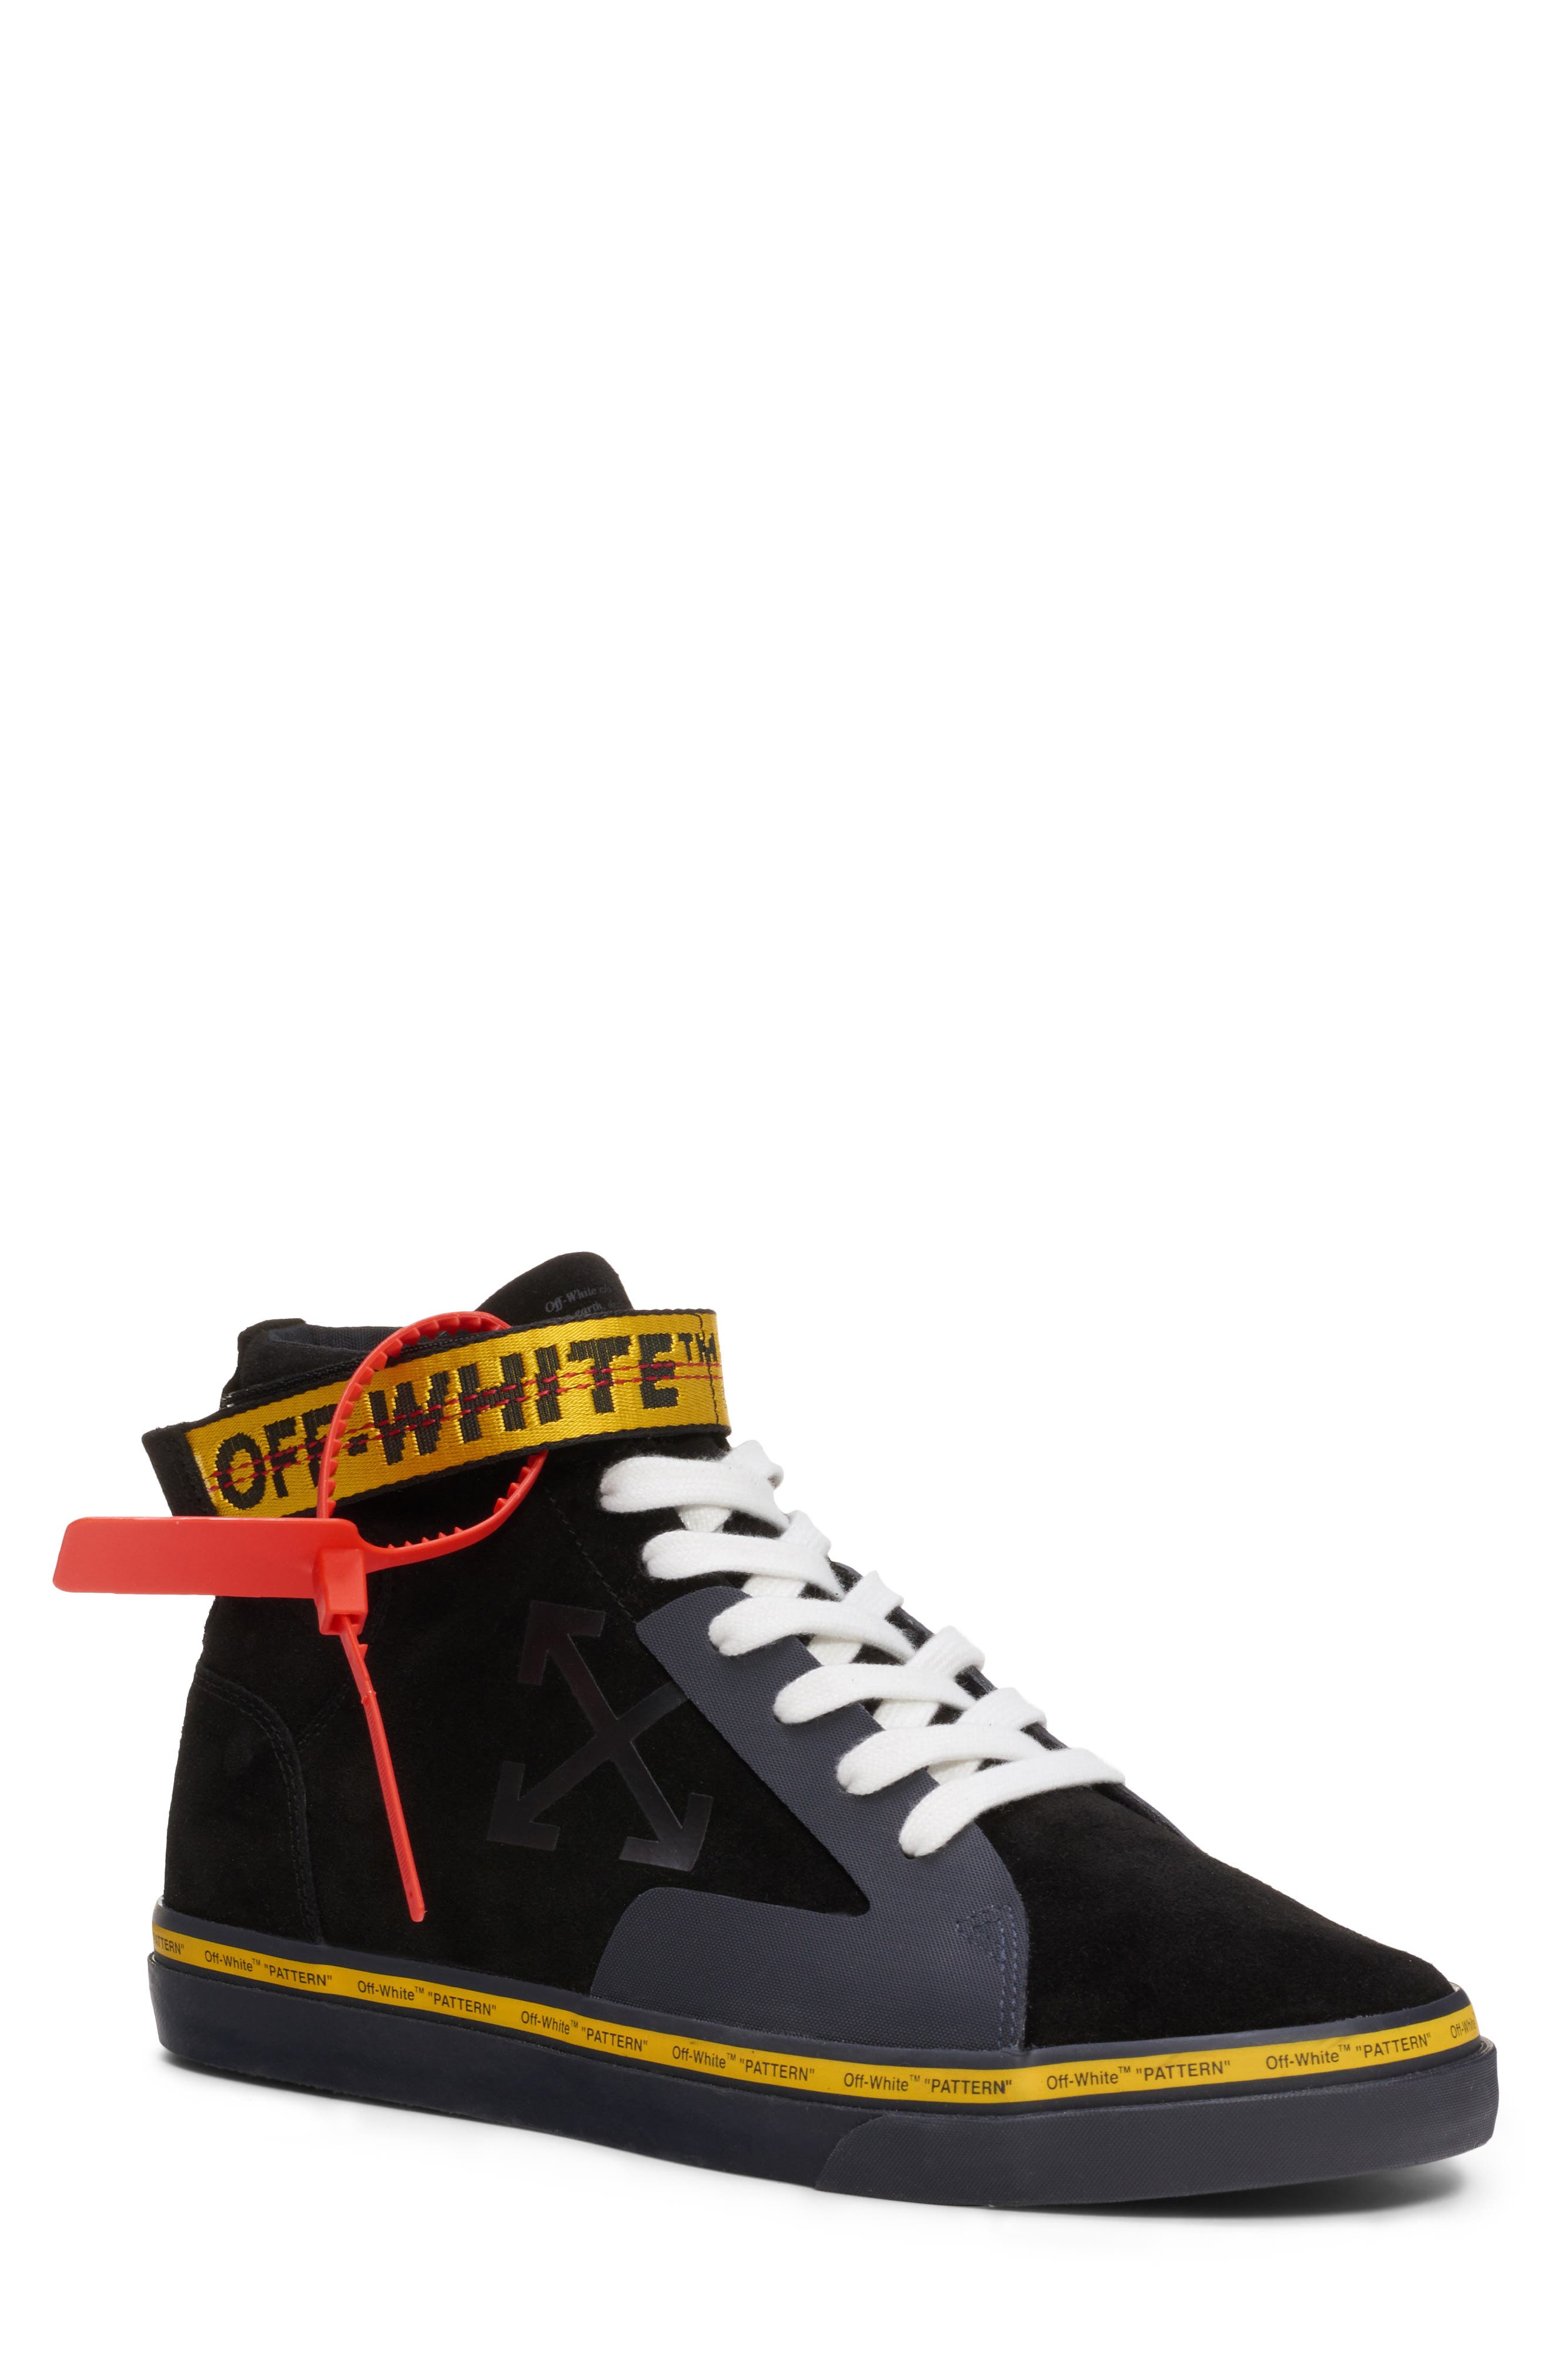 off white skateboard shoes